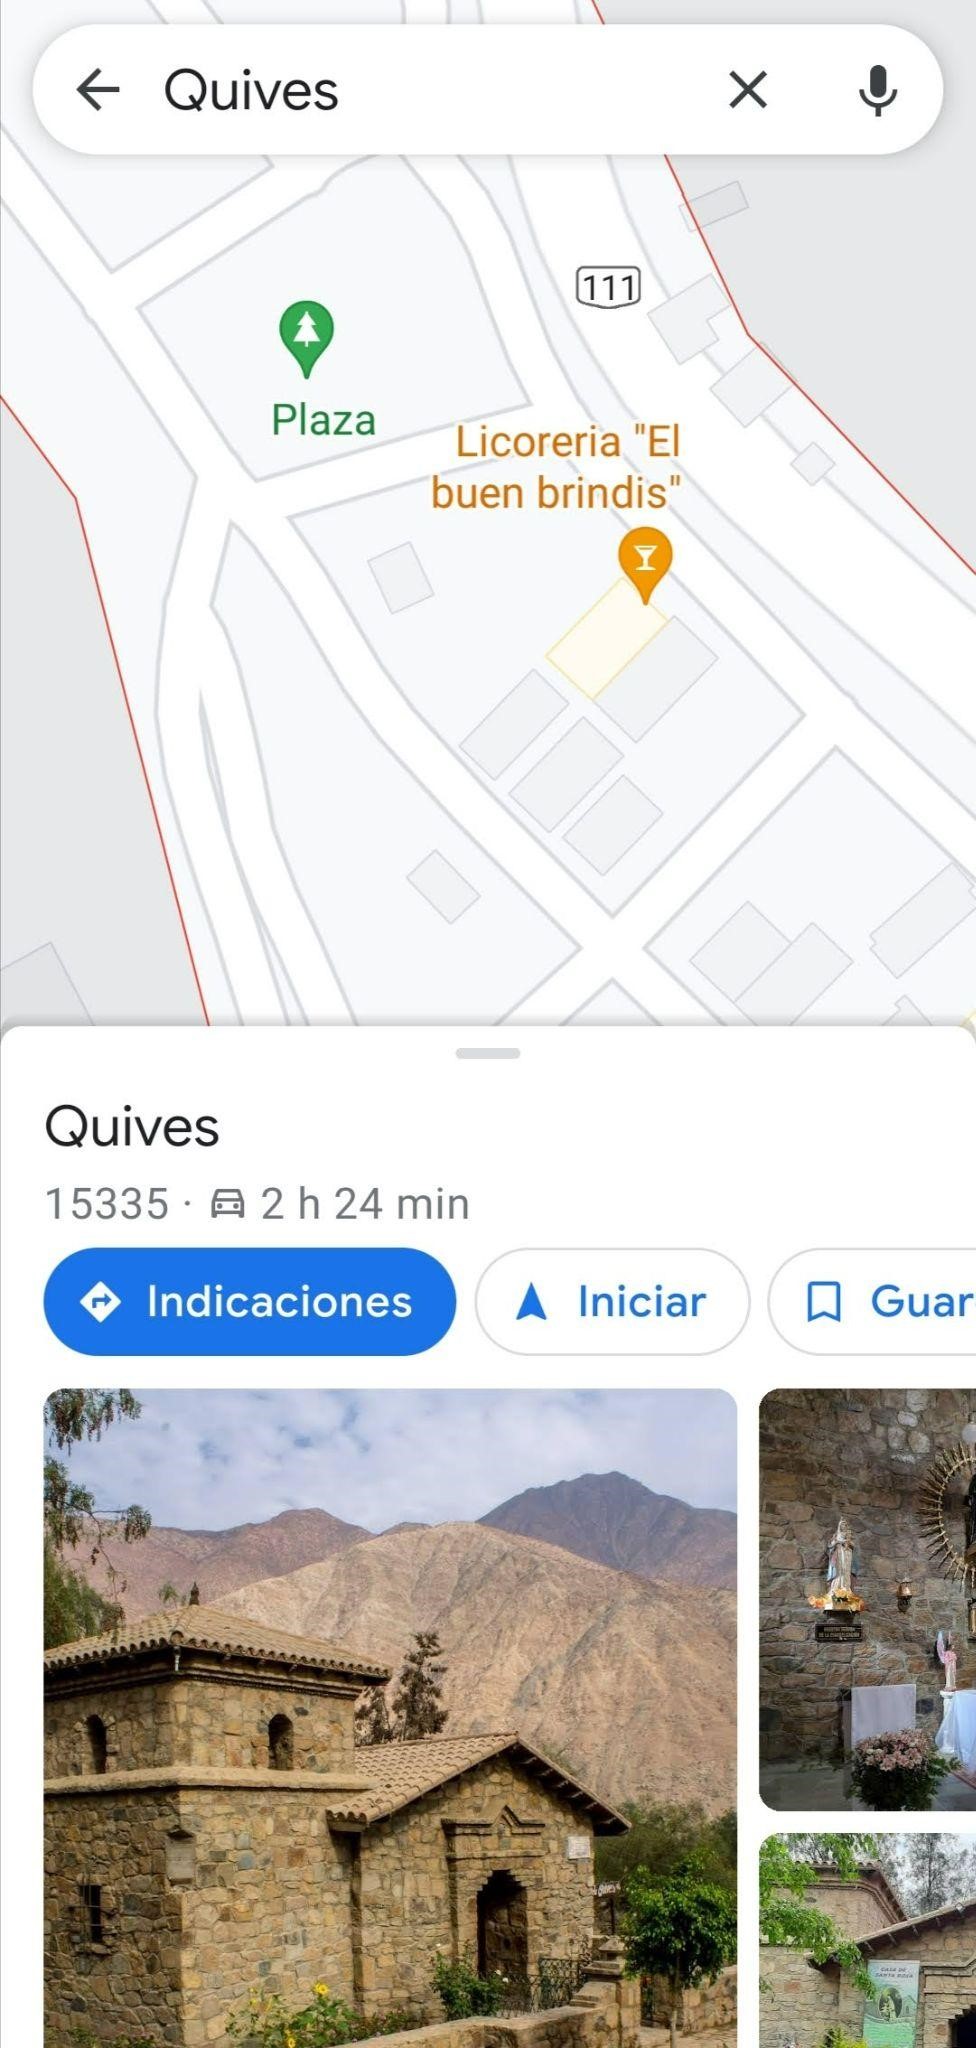 Google Maps gives you detailed information about the places you want to visit, with their coordinates and photos.  Photo: Google.